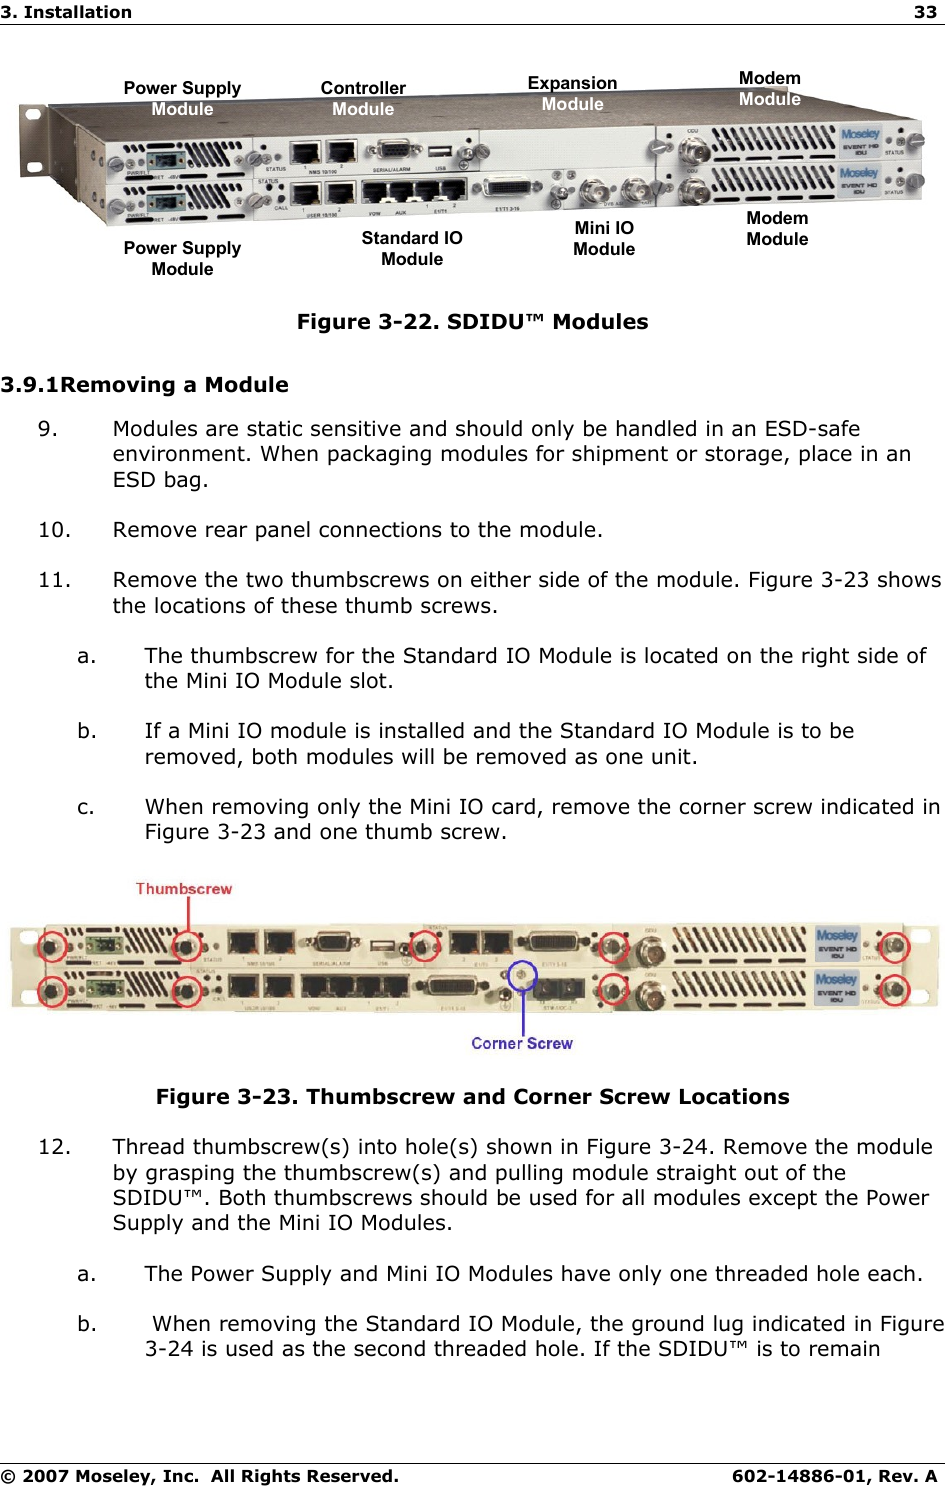 3. Installation 33Power Supply ModulePower Supply ModuleController ModuleStandard IO ModuleMini IO ModuleExpansion ModuleModem ModuleModem ModuleFigure 3-22. SDIDU™ Modules3.9.1Removing a Module9. Modules are static sensitive and should only be handled in an ESD-safe environment. When packaging modules for shipment or storage, place in an ESD bag.10. Remove rear panel connections to the module.11. Remove the two thumbscrews on either side of the module. Figure 3-23 shows the locations of these thumb screws.a. The thumbscrew for the Standard IO Module is located on the right side of the Mini IO Module slot.b. If a Mini IO module is installed and the Standard IO Module is to be removed, both modules will be removed as one unit.c. When removing only the Mini IO card, remove the corner screw indicated in Figure 3-23 and one thumb screw.Figure 3-23. Thumbscrew and Corner Screw Locations12. Thread thumbscrew(s) into hole(s) shown in Figure 3-24. Remove the module by grasping the thumbscrew(s) and pulling module straight out of the SDIDU™. Both thumbscrews should be used for all modules except the Power Supply and the Mini IO Modules. a. The Power Supply and Mini IO Modules have only one threaded hole each.b.  When removing the Standard IO Module, the ground lug indicated in Figure 3-24 is used as the second threaded hole. If the SDIDU™ is to remain © 2007 Moseley, Inc.  All Rights Reserved. 602-14886-01, Rev. A